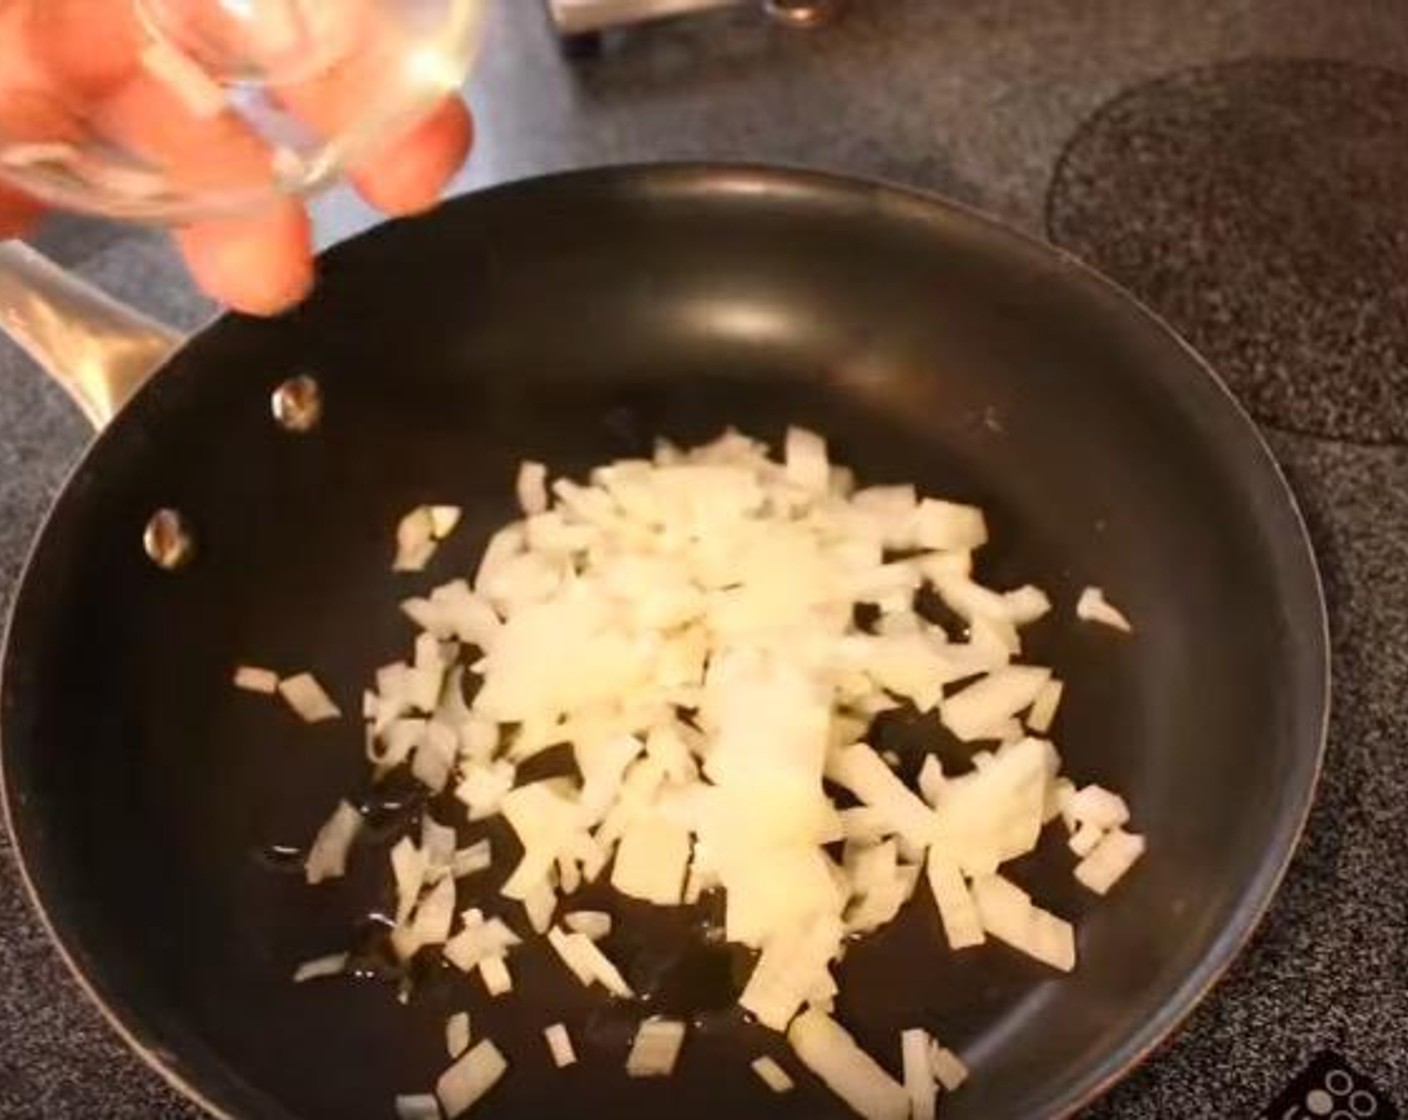 step 1 In a sauté pan over medium heat add Olive Oil (1 Tbsp) and Onion (1/2). Cook for 2-3 minutes until onion turns translucent.